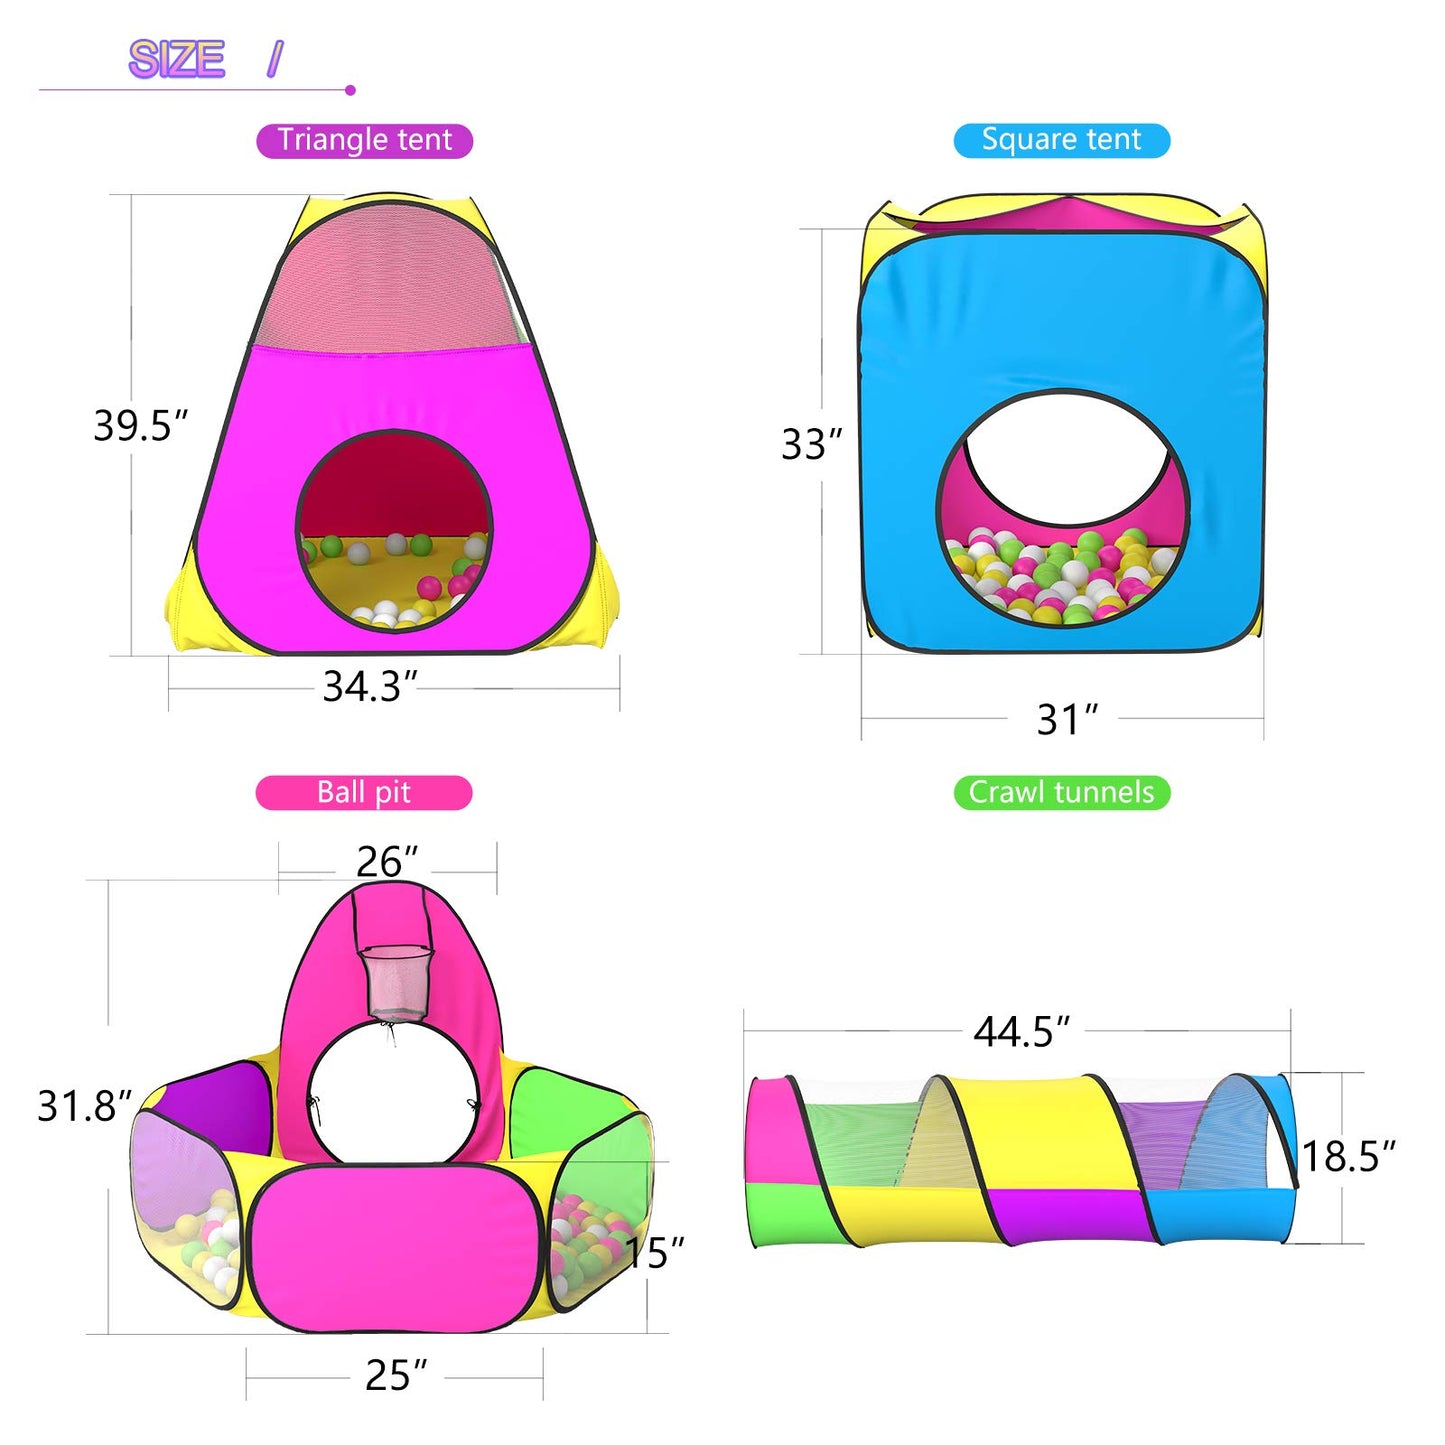 5pc Kids Play Tent for Toddler with 1 Baby Ball Pits, 2 Baby Crawl Tunnels, 2 Pop Up Tents